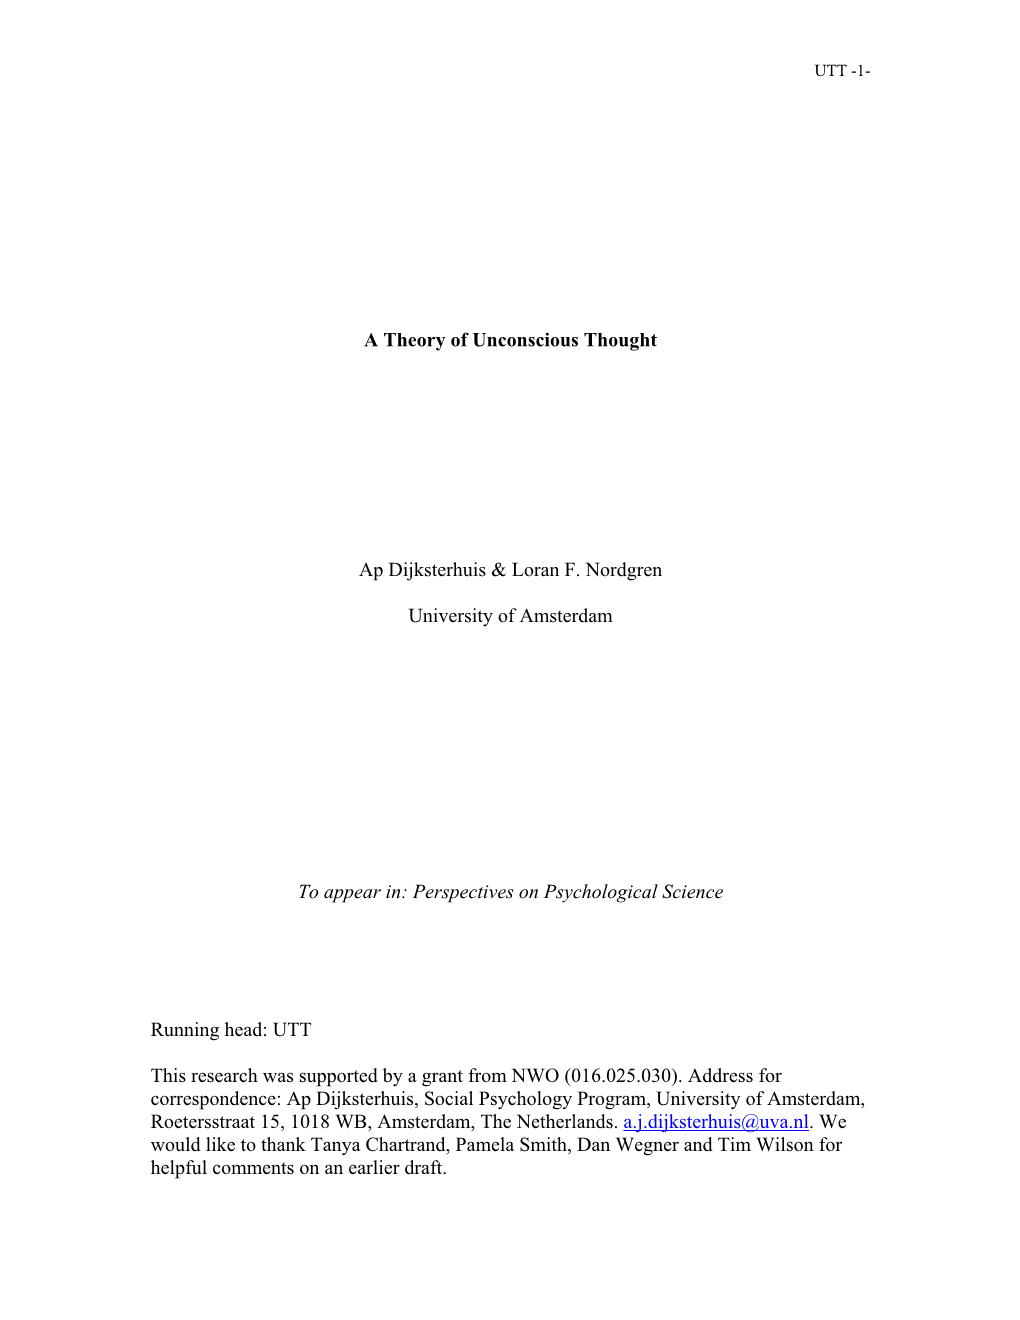 A Theory of Unconscious Thought Ap Dijksterhuis & Loran F. Nordgren